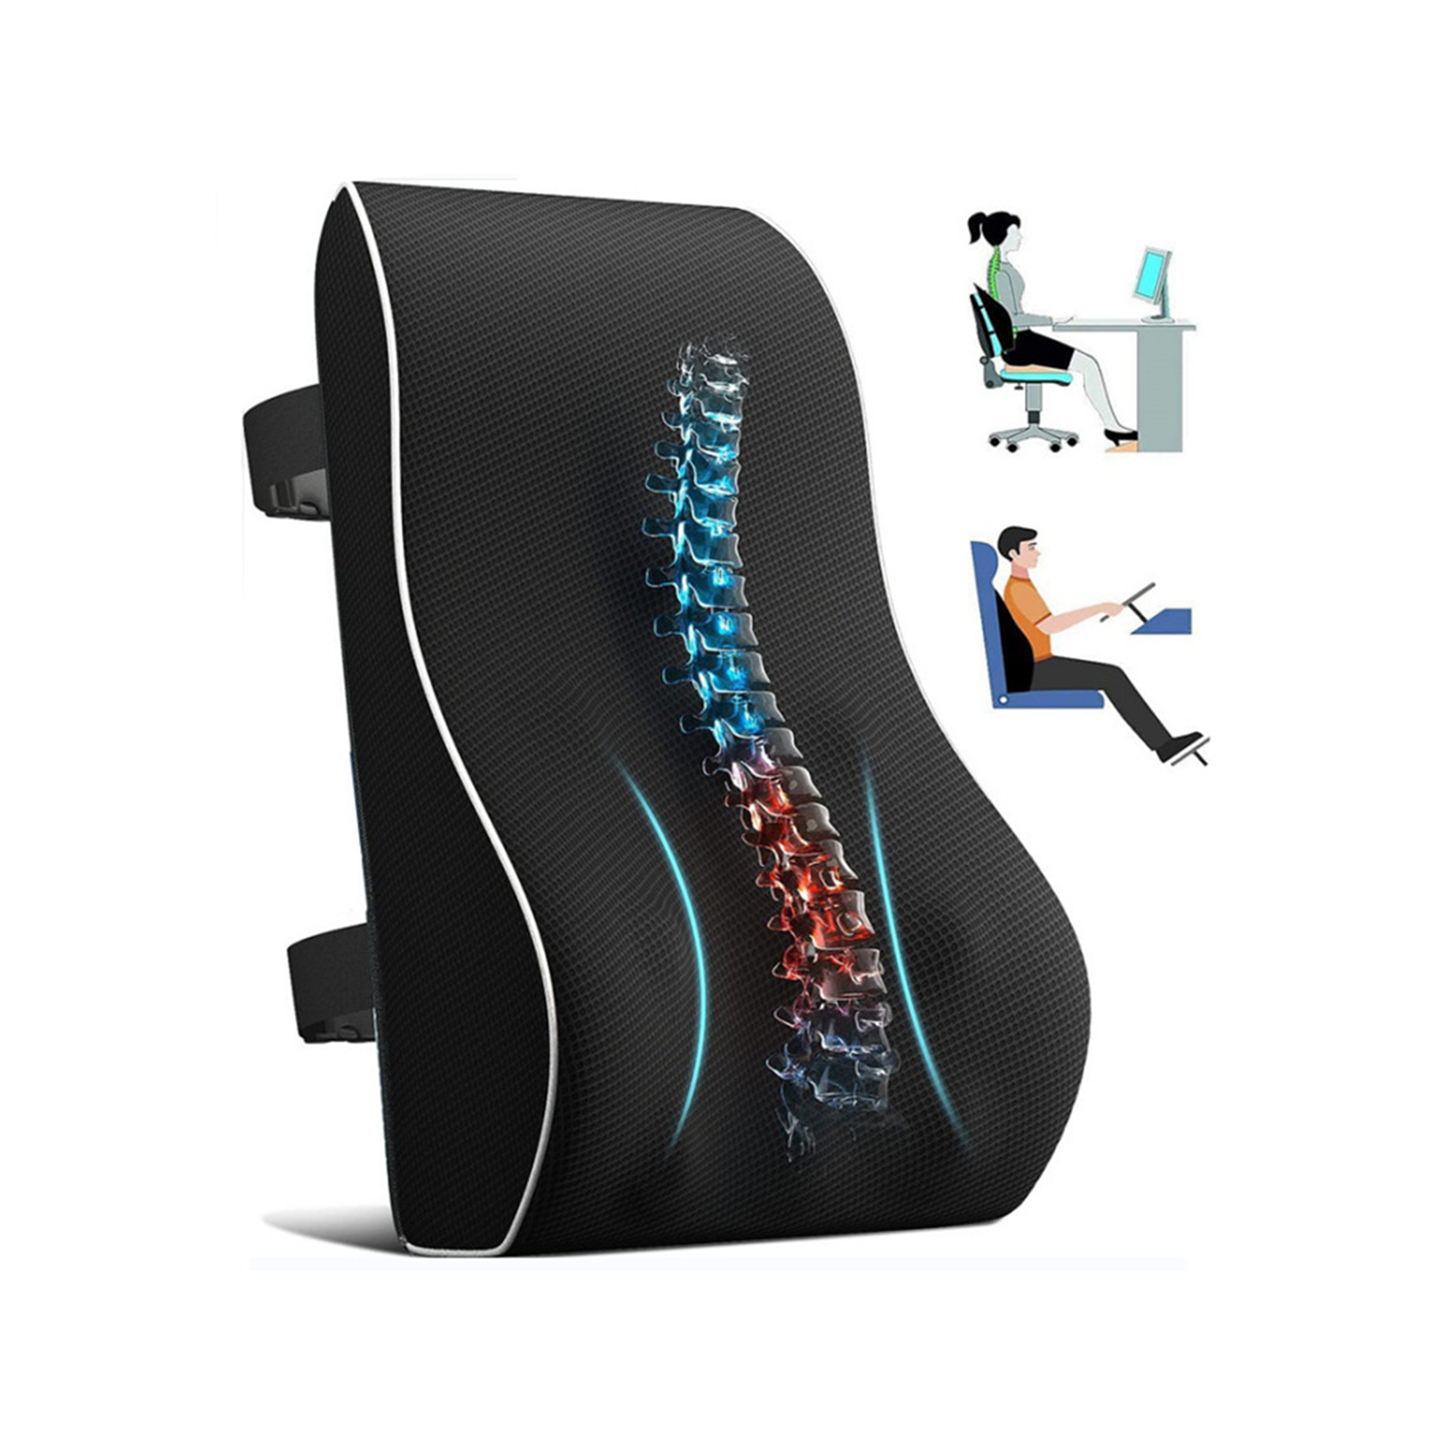 Black Ergonomic Lumbar Entire Support Pillow, Memory Foam Back Cushion Suitable for Home, Office, Car, Wheelchair, Backrest with Breathable and Skin-friendly 3D Mesh Cover & Dual Adjustable Straps